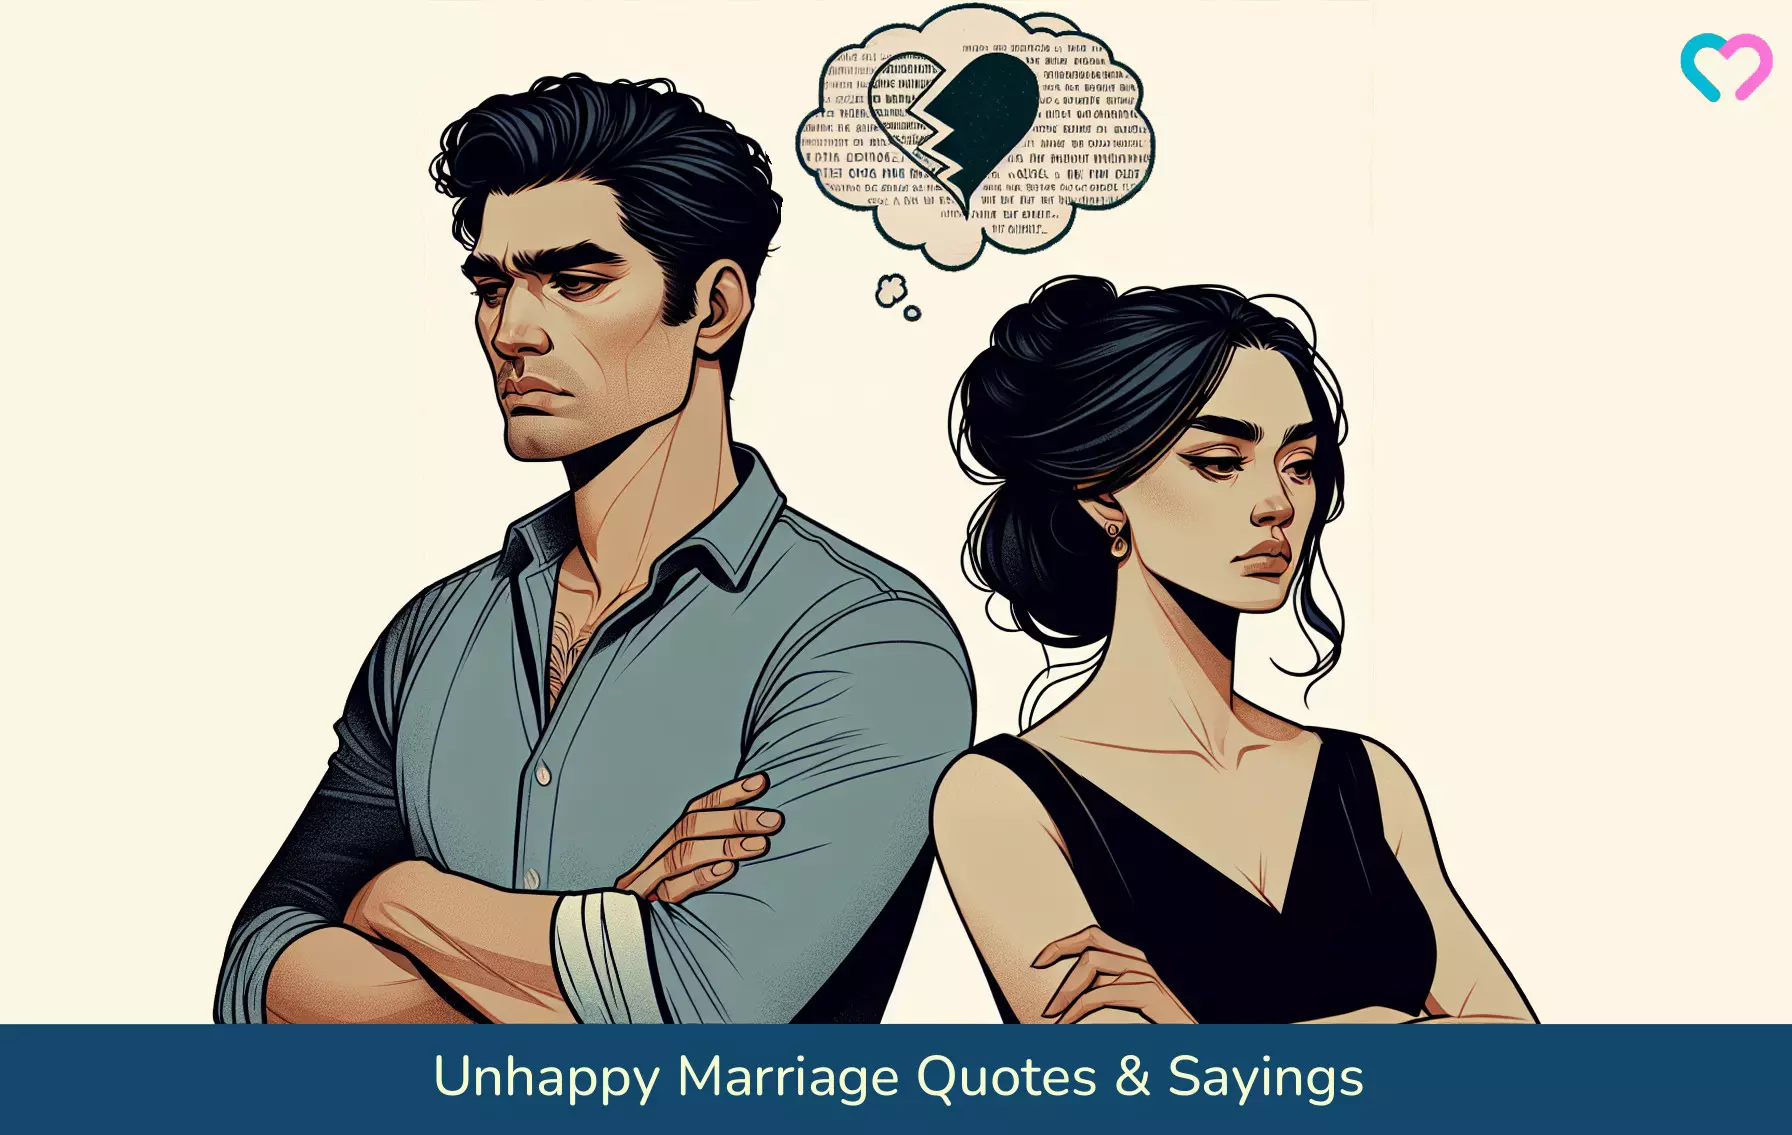 unhappy marriage quotes_illustration